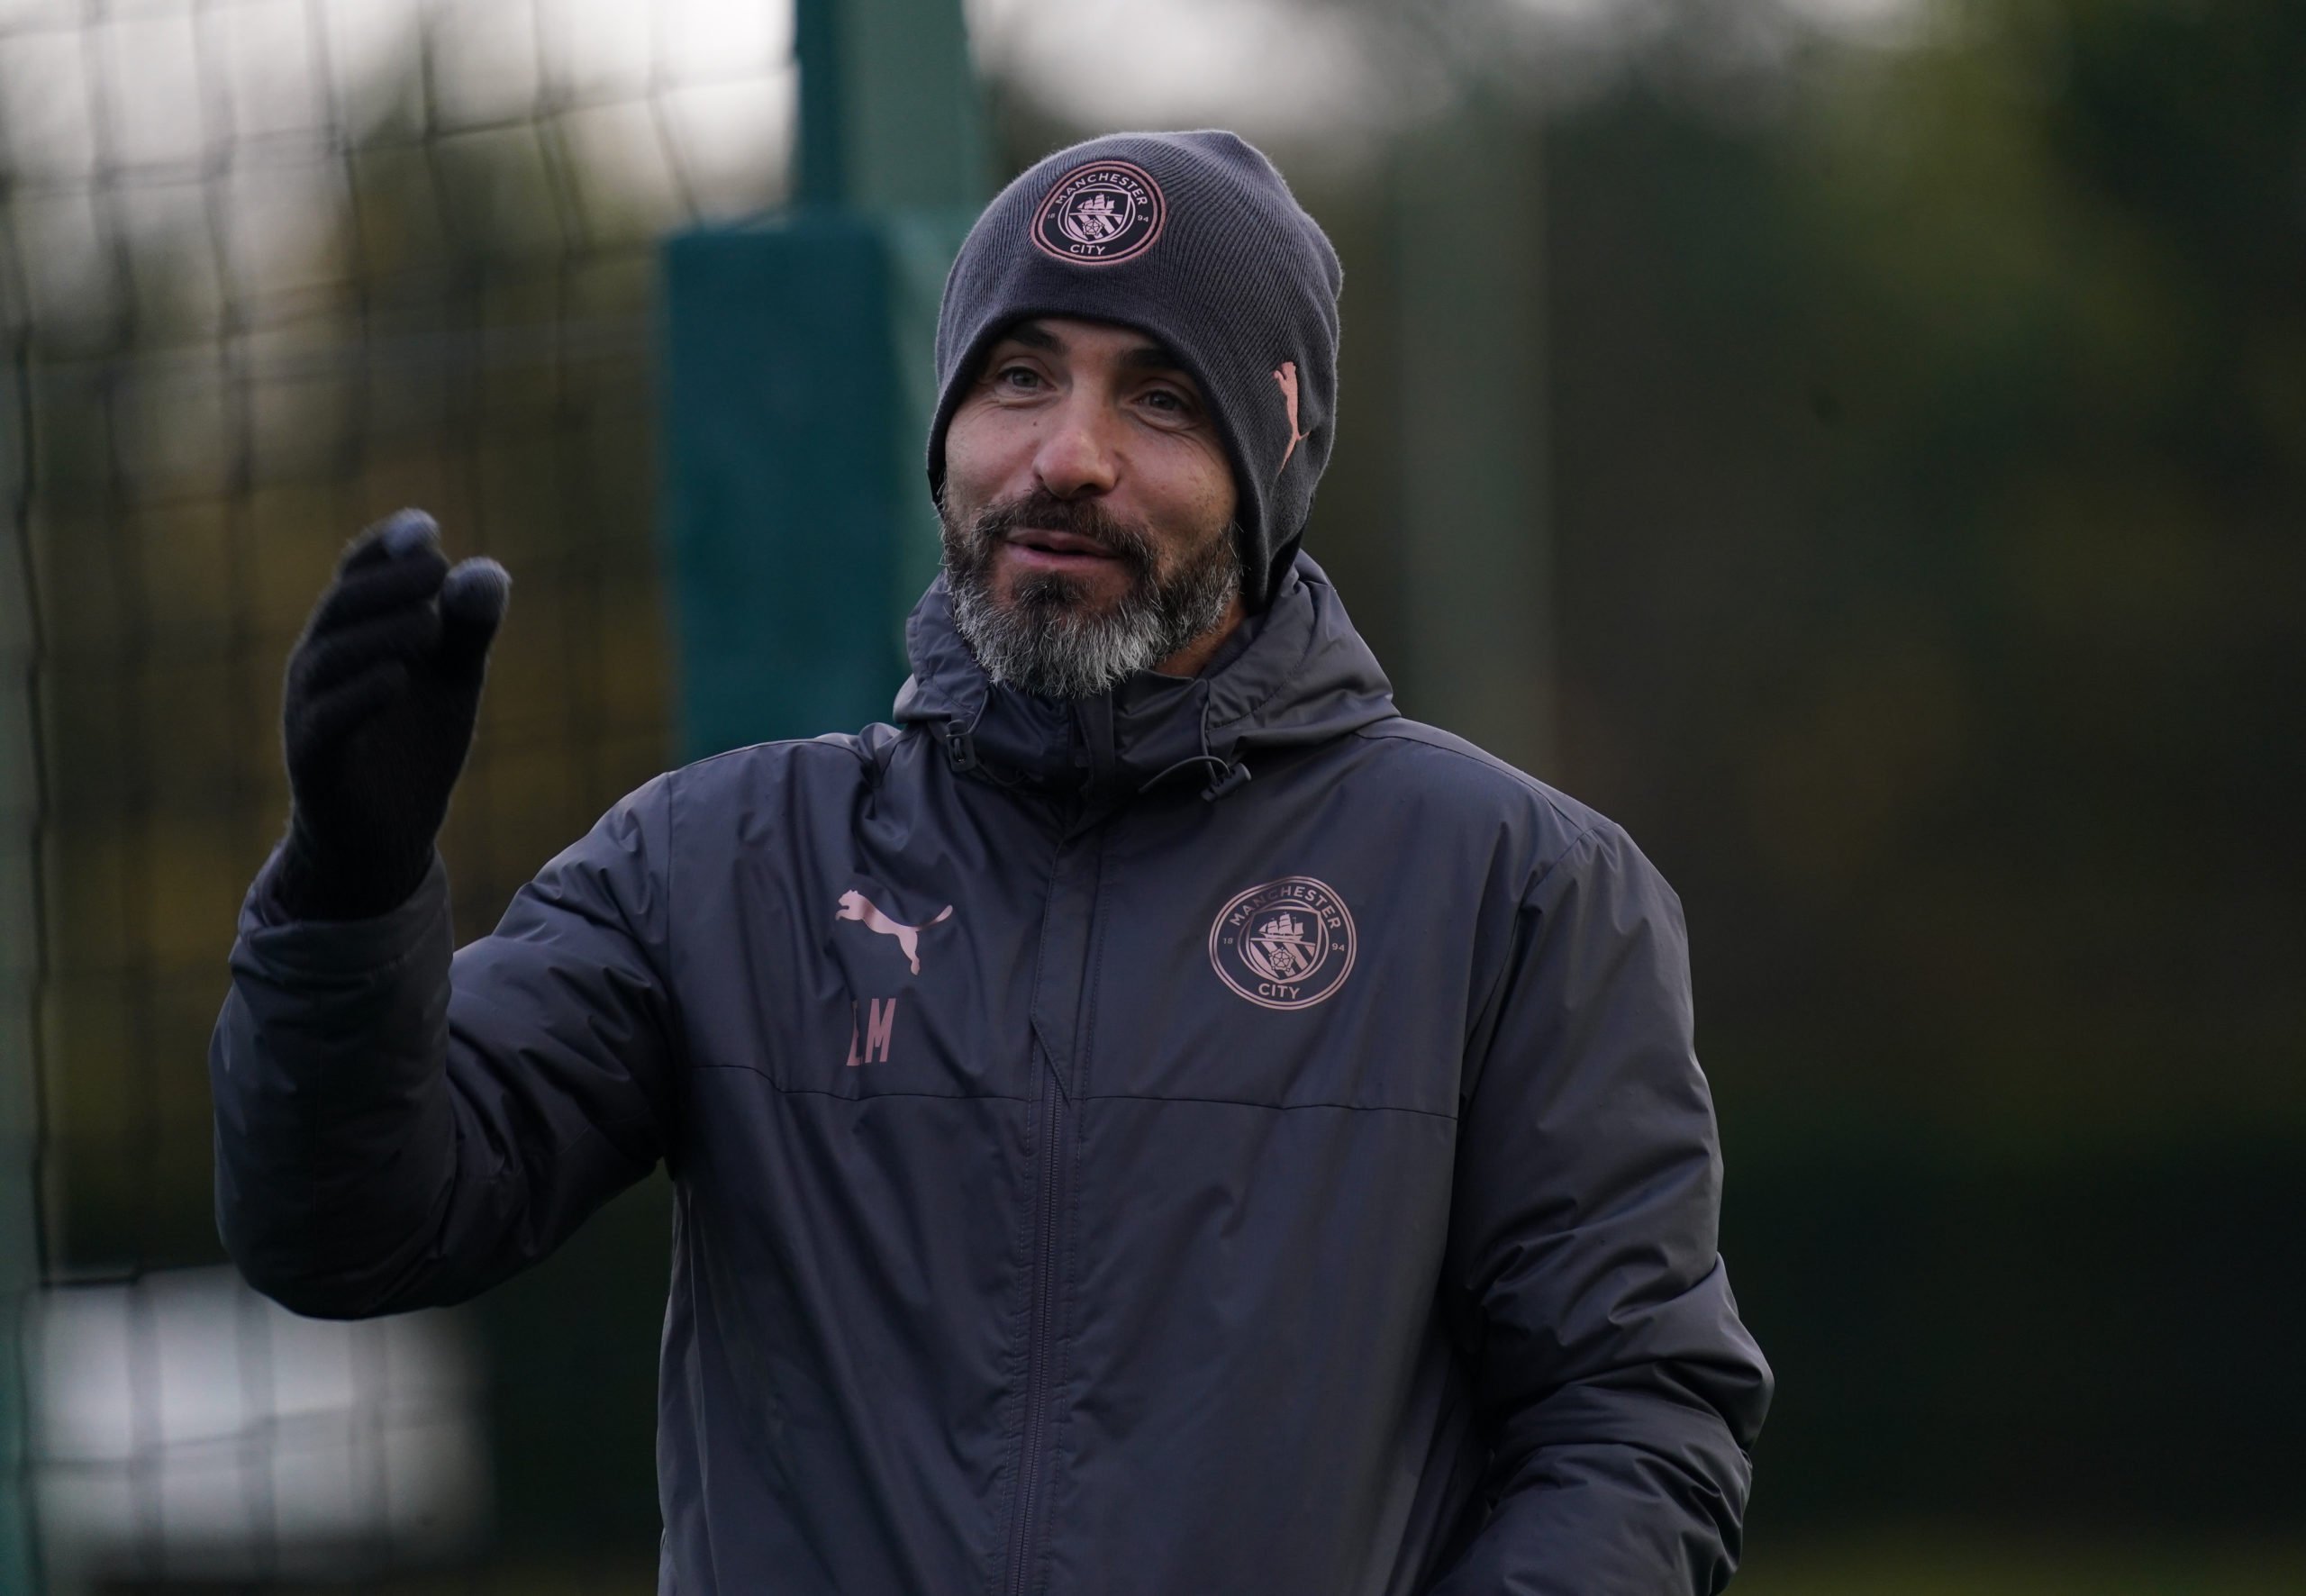 Celtic candidate Enzo Maresca on course for historic season & incredible goal total with Man City U23s